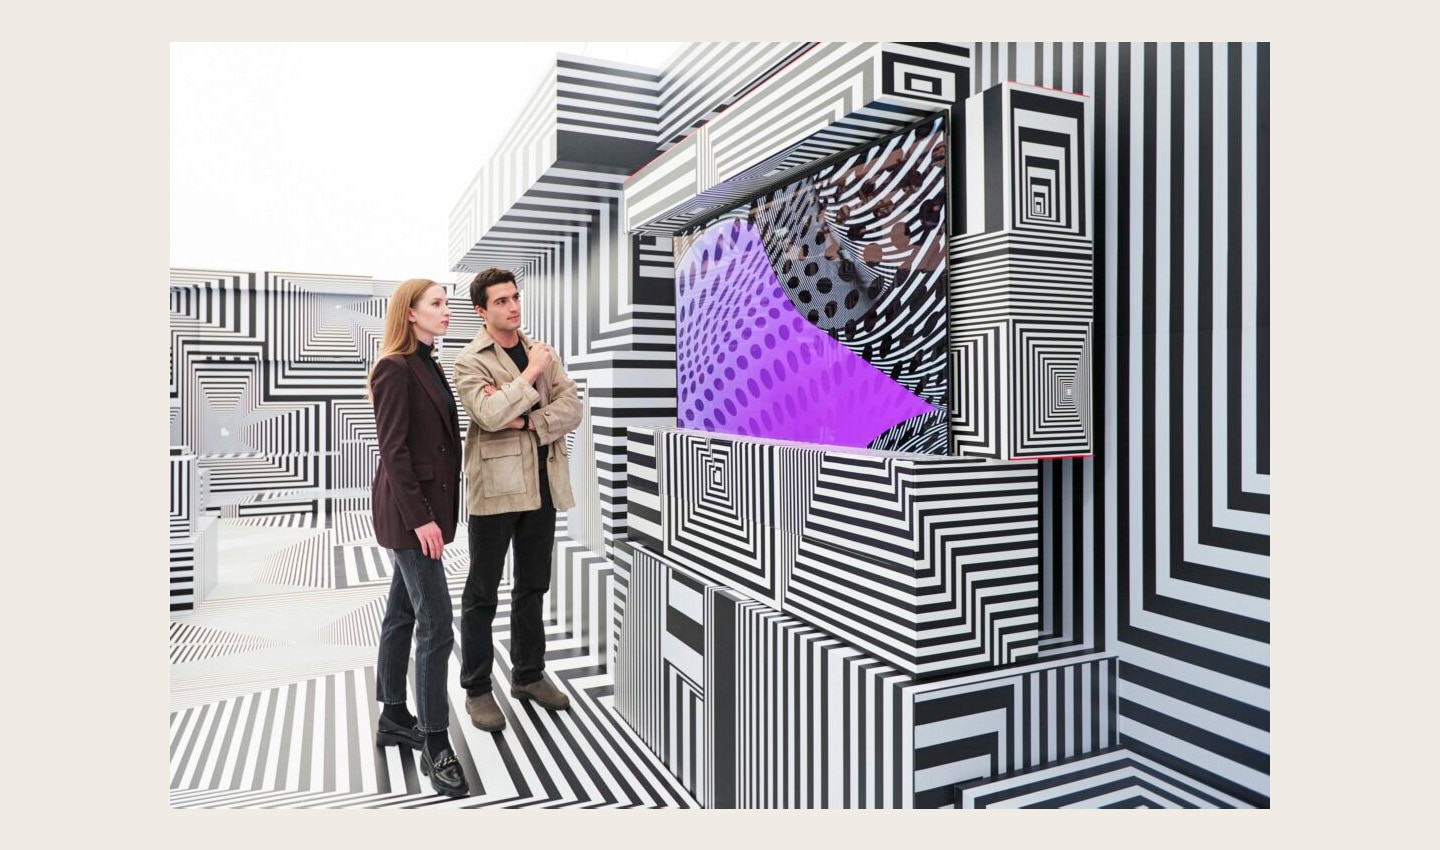 Two visitors taking a closer look at LG OLED-powered “Into the Maze” installation by the German artist, Tobias Rehberger